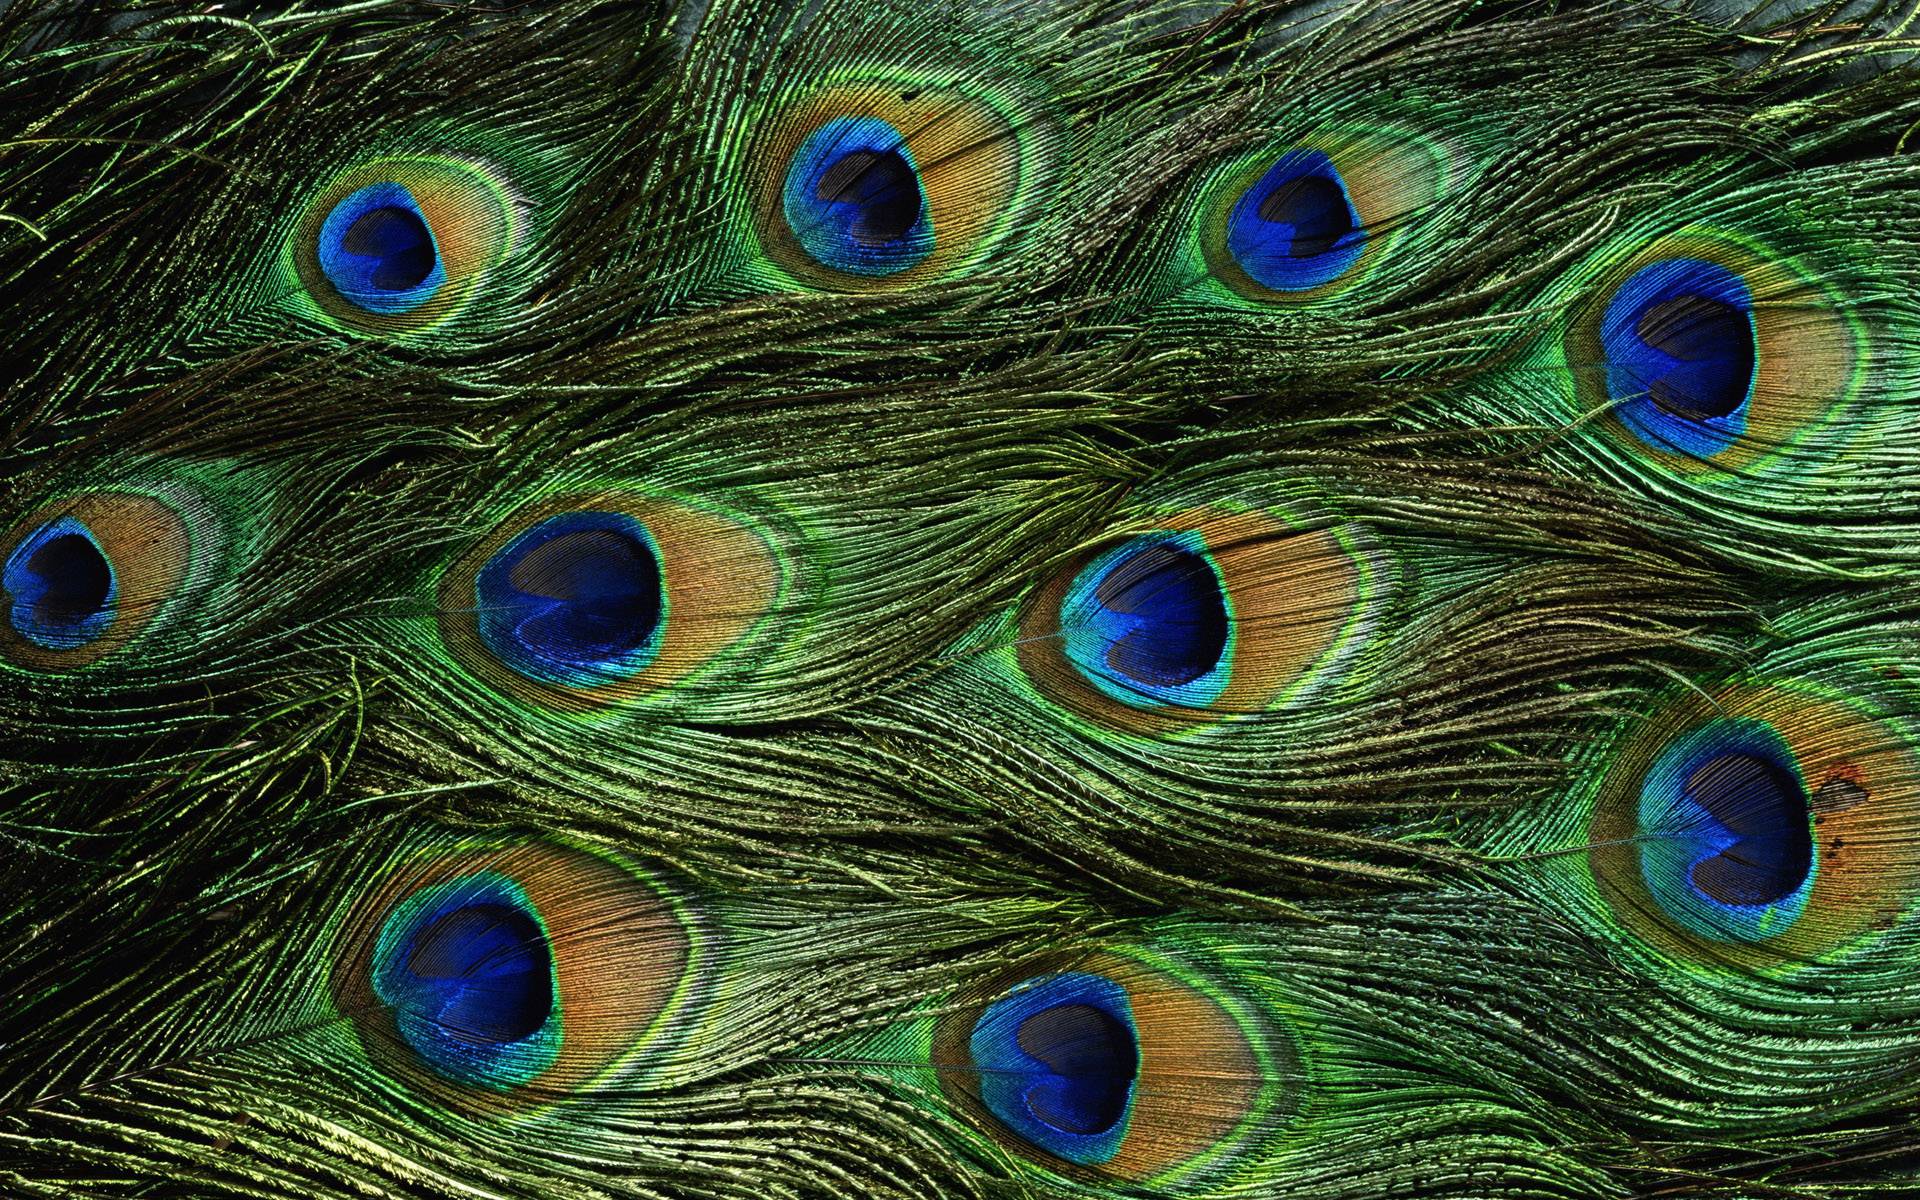 Wallpaper.wiki Peacock Feathers HD Wallpaper PIC WPE002036